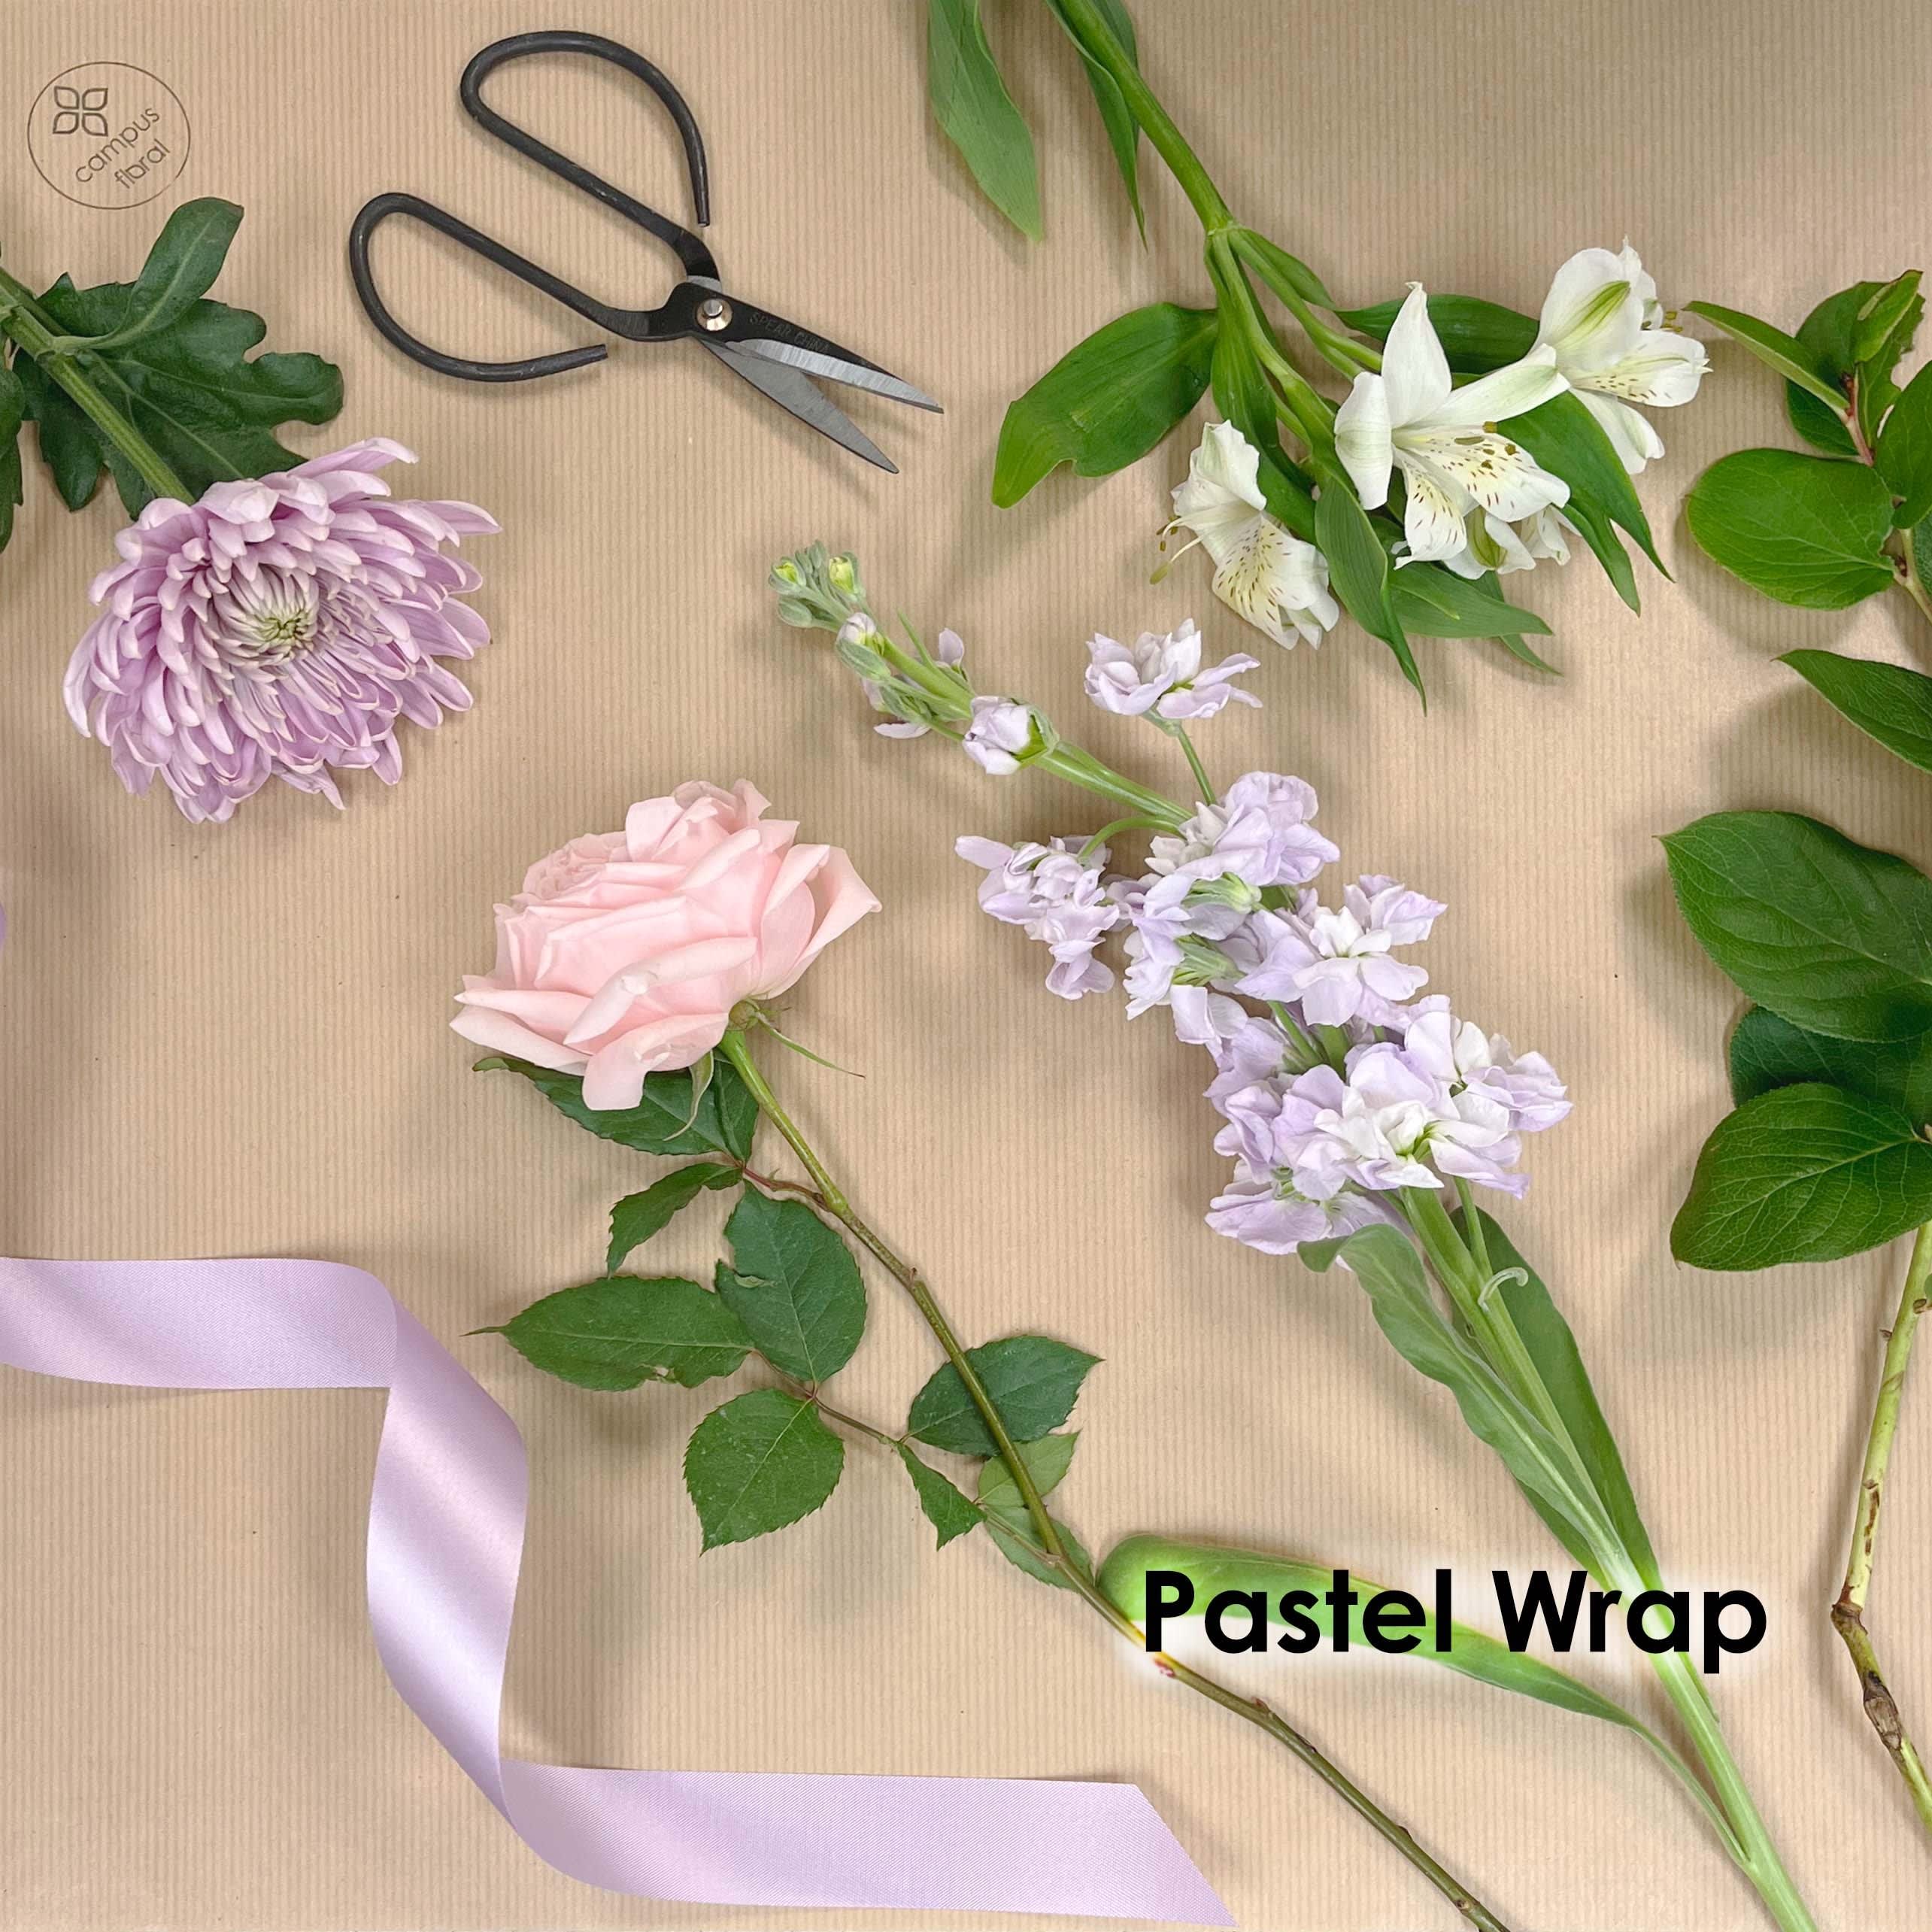 Pastel Wrap  - A lovely bouquet of pastel colored wrapped flowers will bring a smile to anyone who receives it.